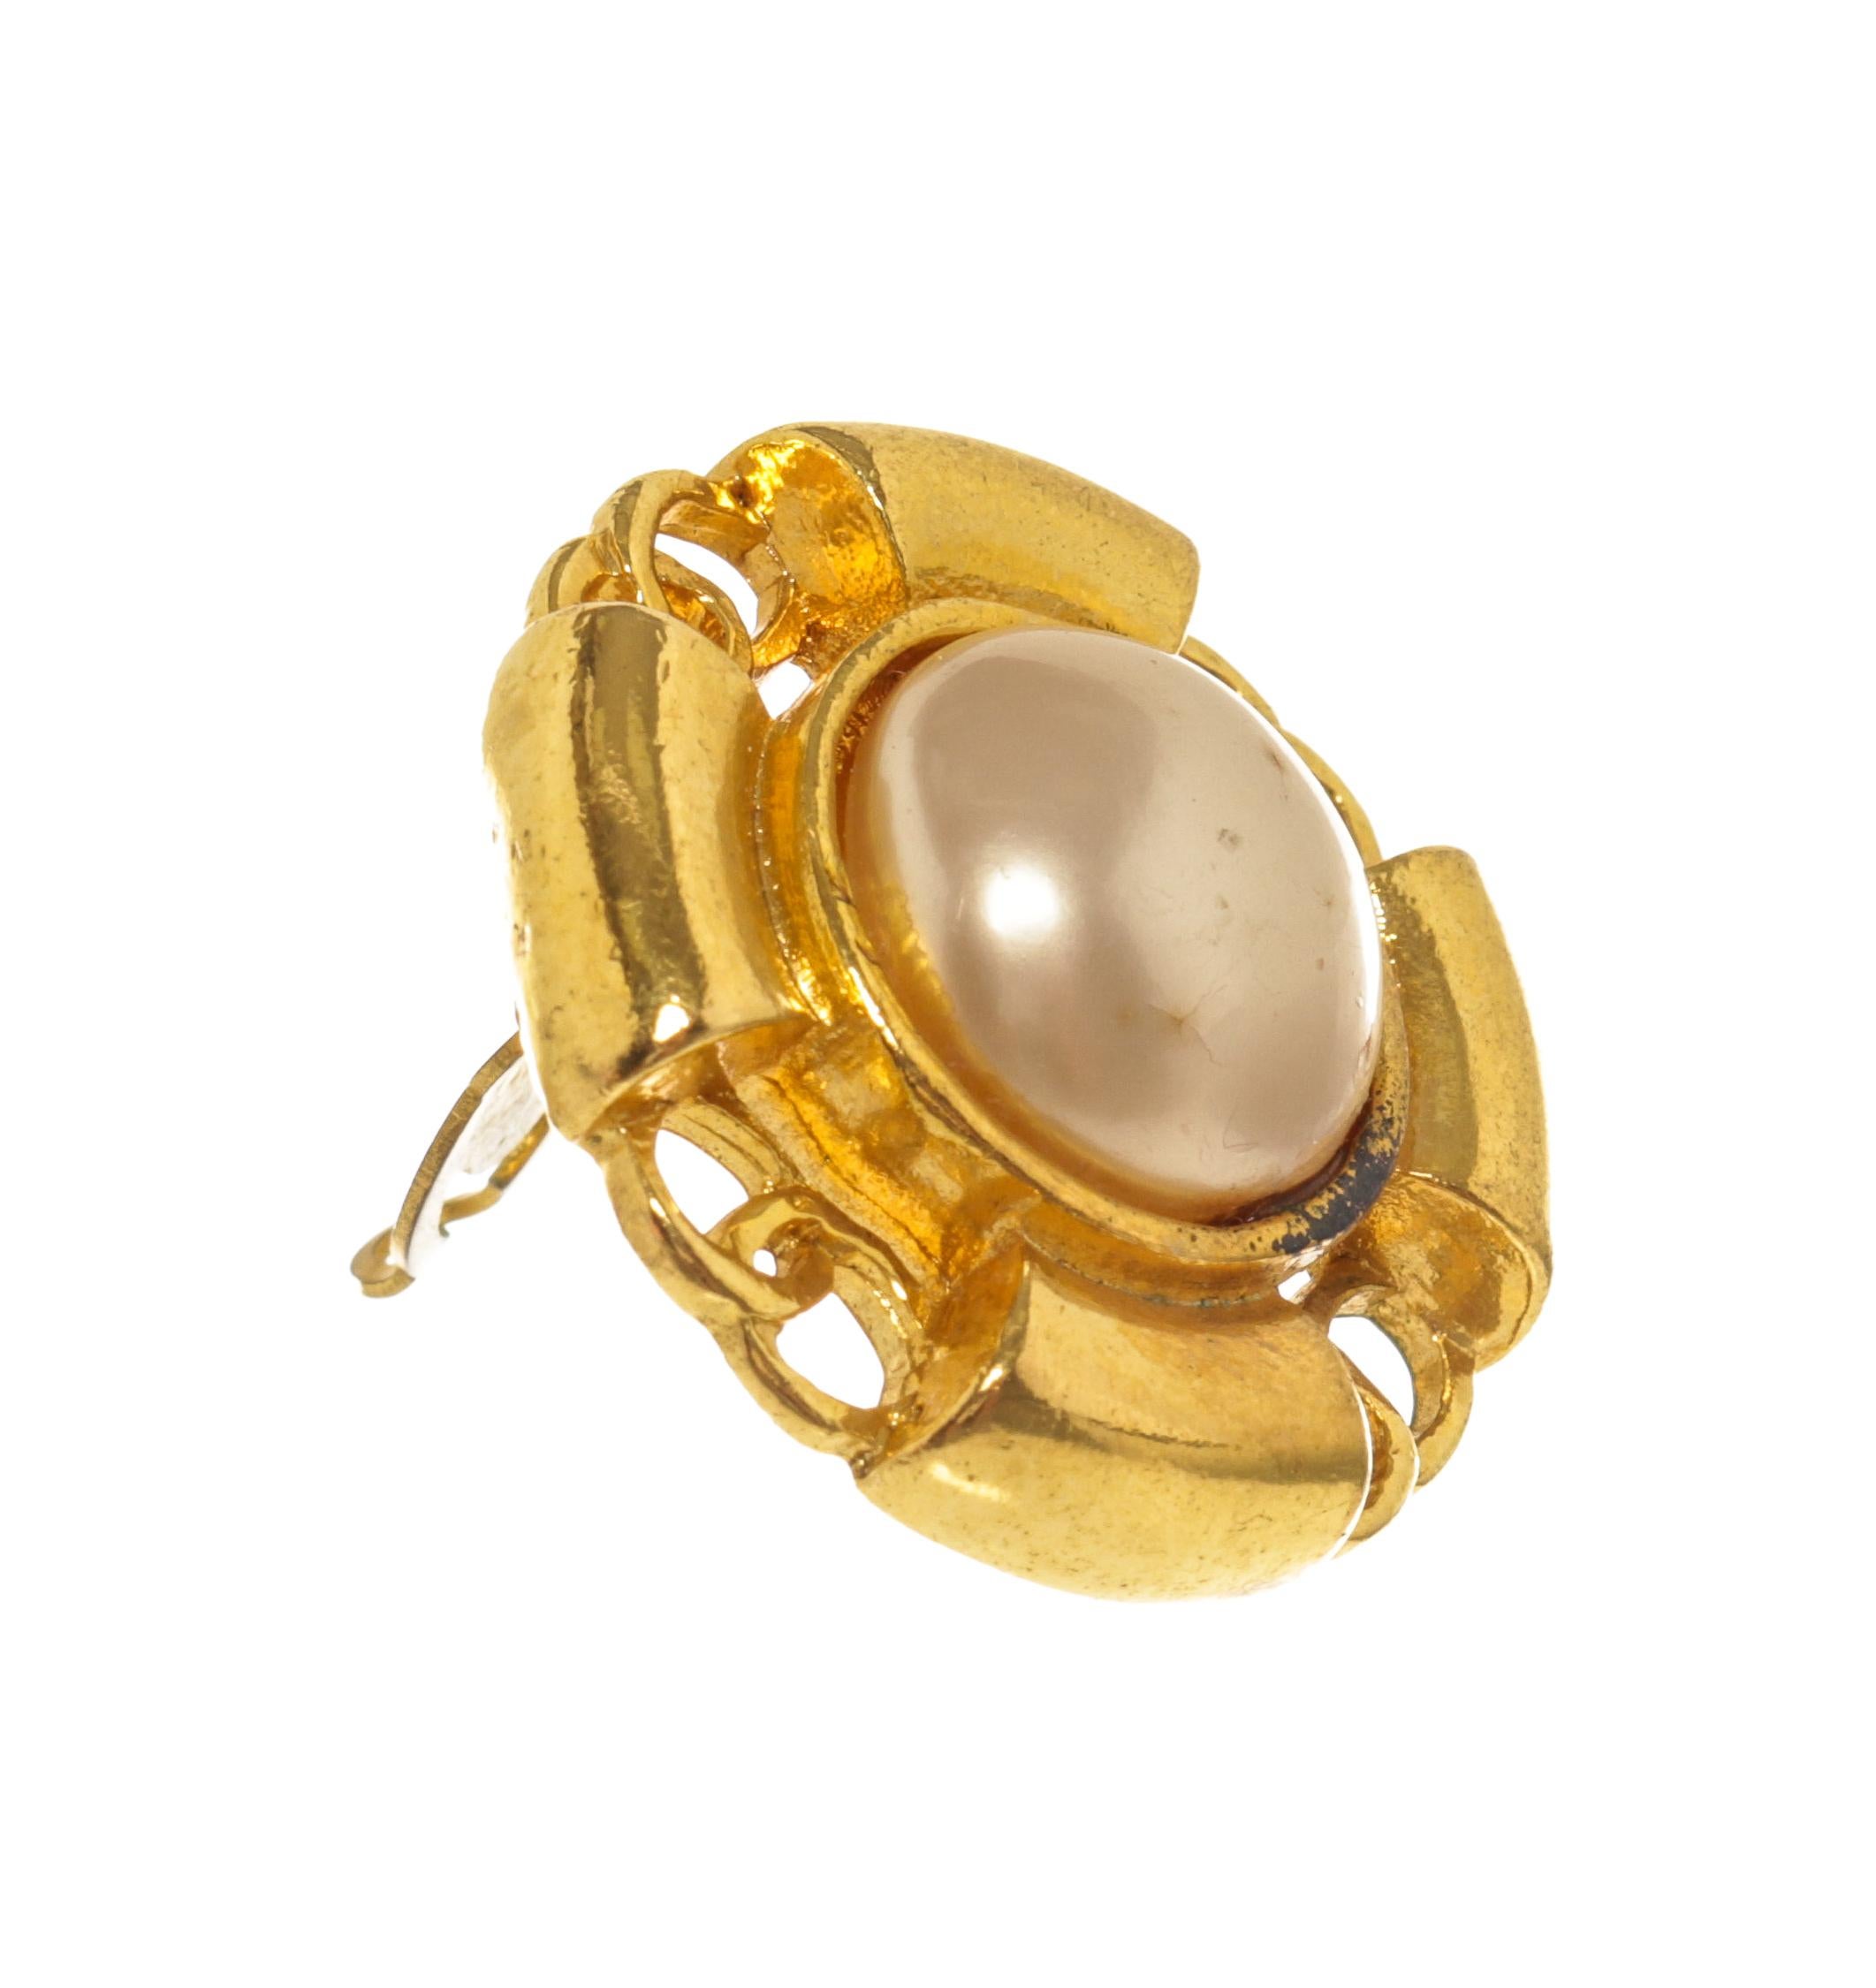 Chanel Gold Faux Pearl Round Earrings with faux pearls and gold tone metal hardware.

770218MSC